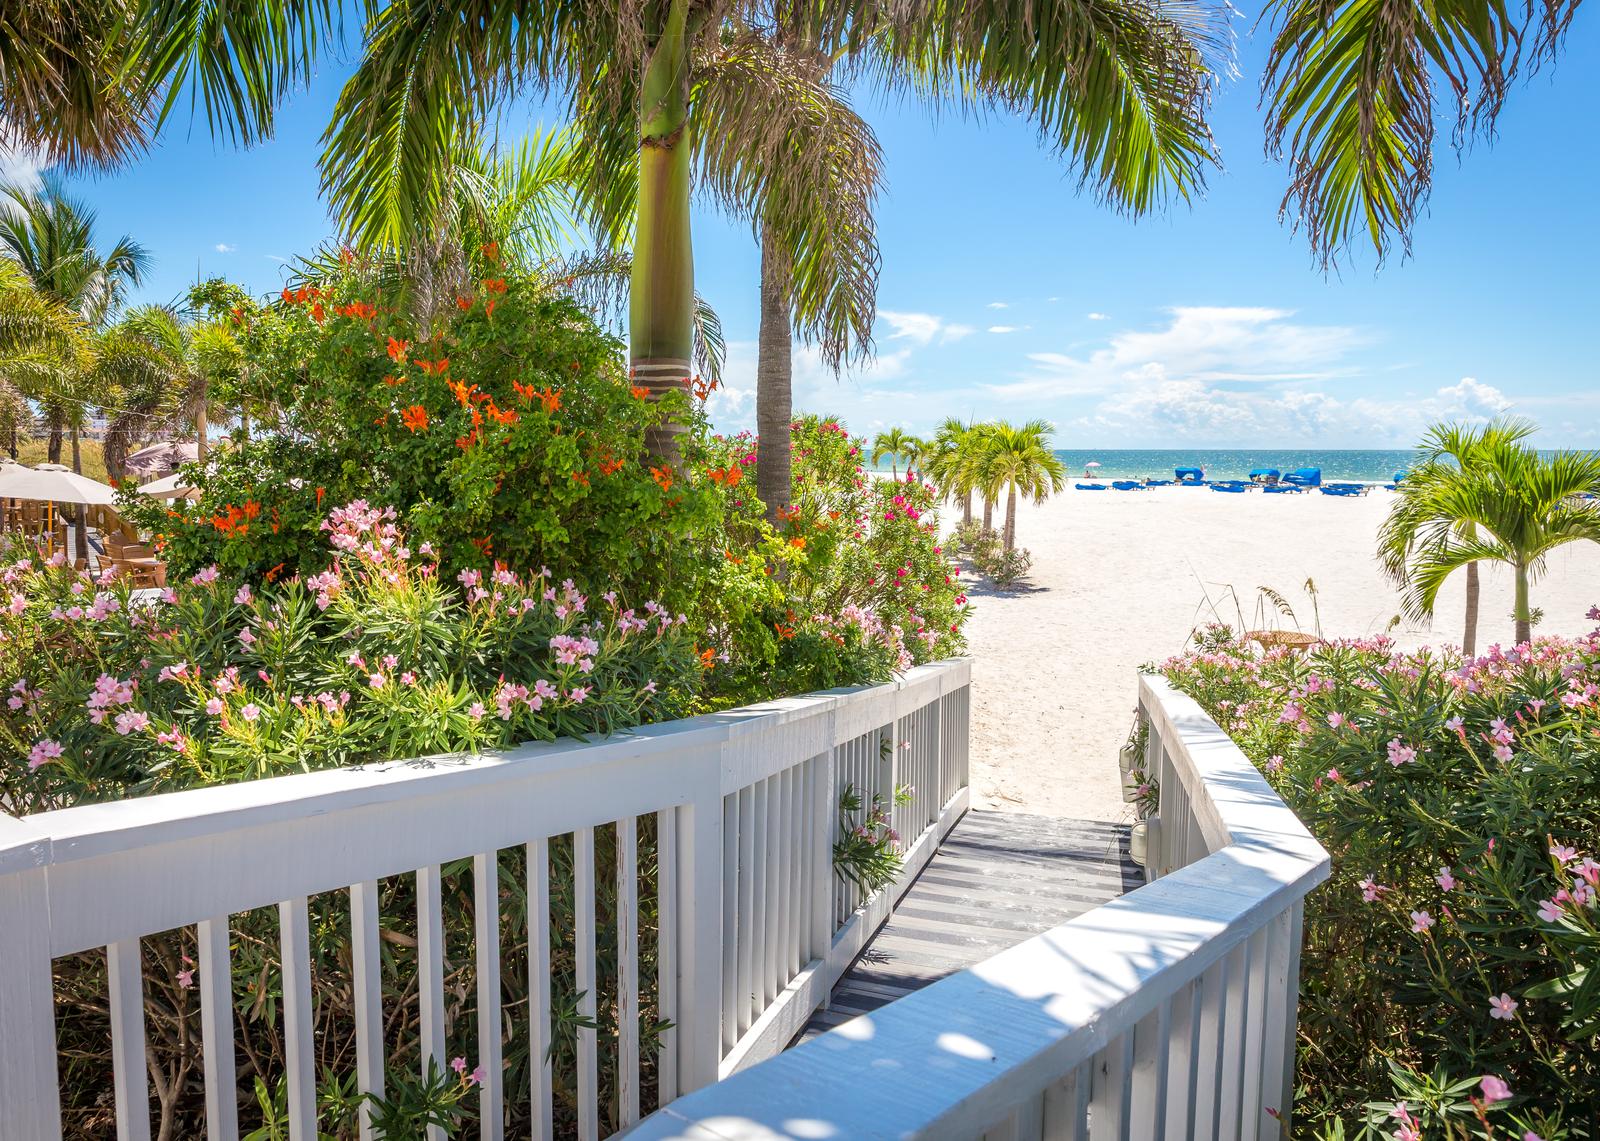 Best Small Towns in Florida for a Romantic Weekend